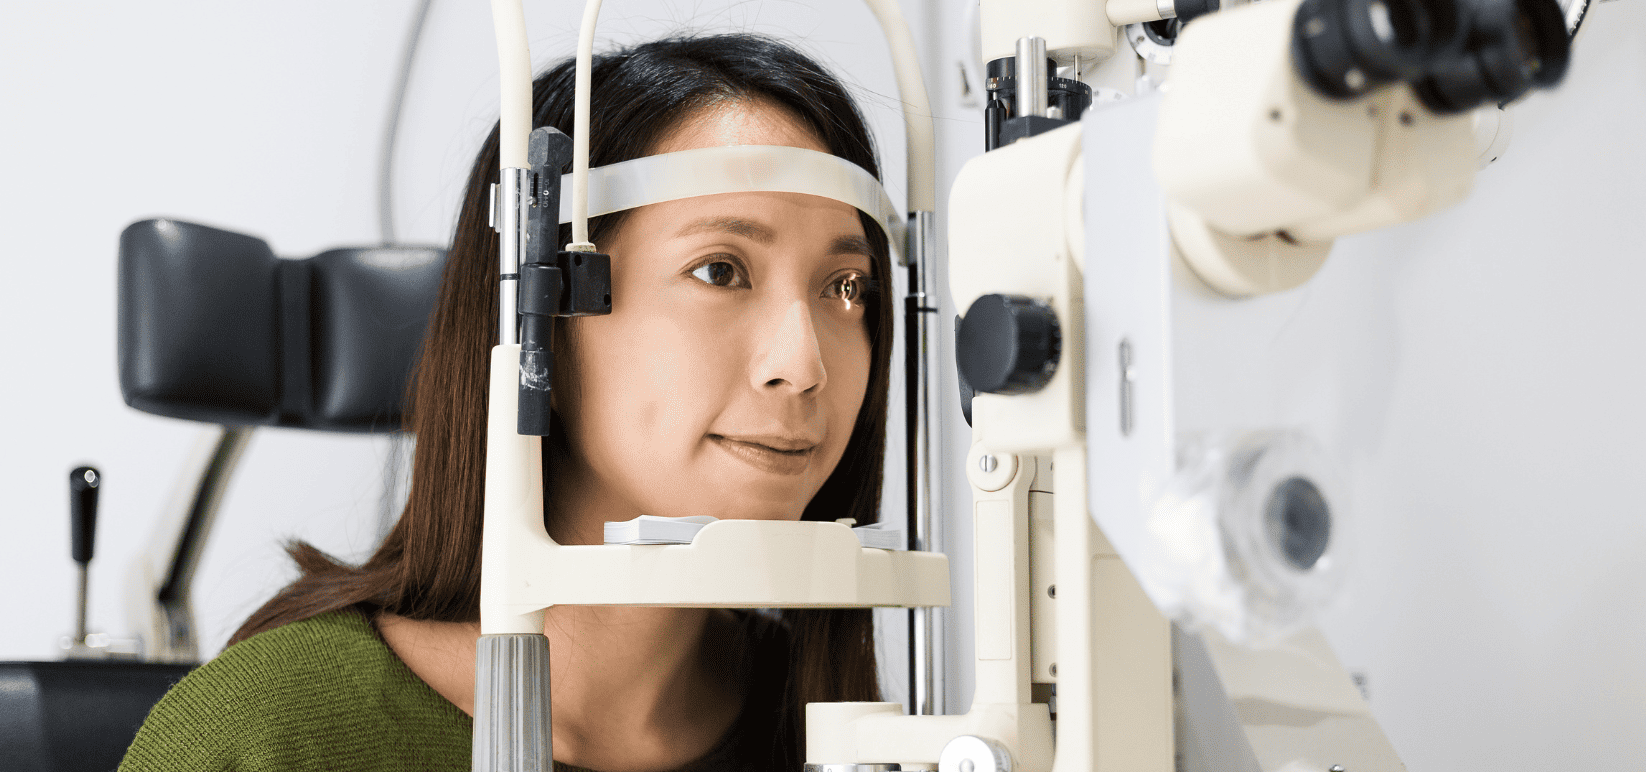 Woman receiving a eye scan in medical office with eye scanning device